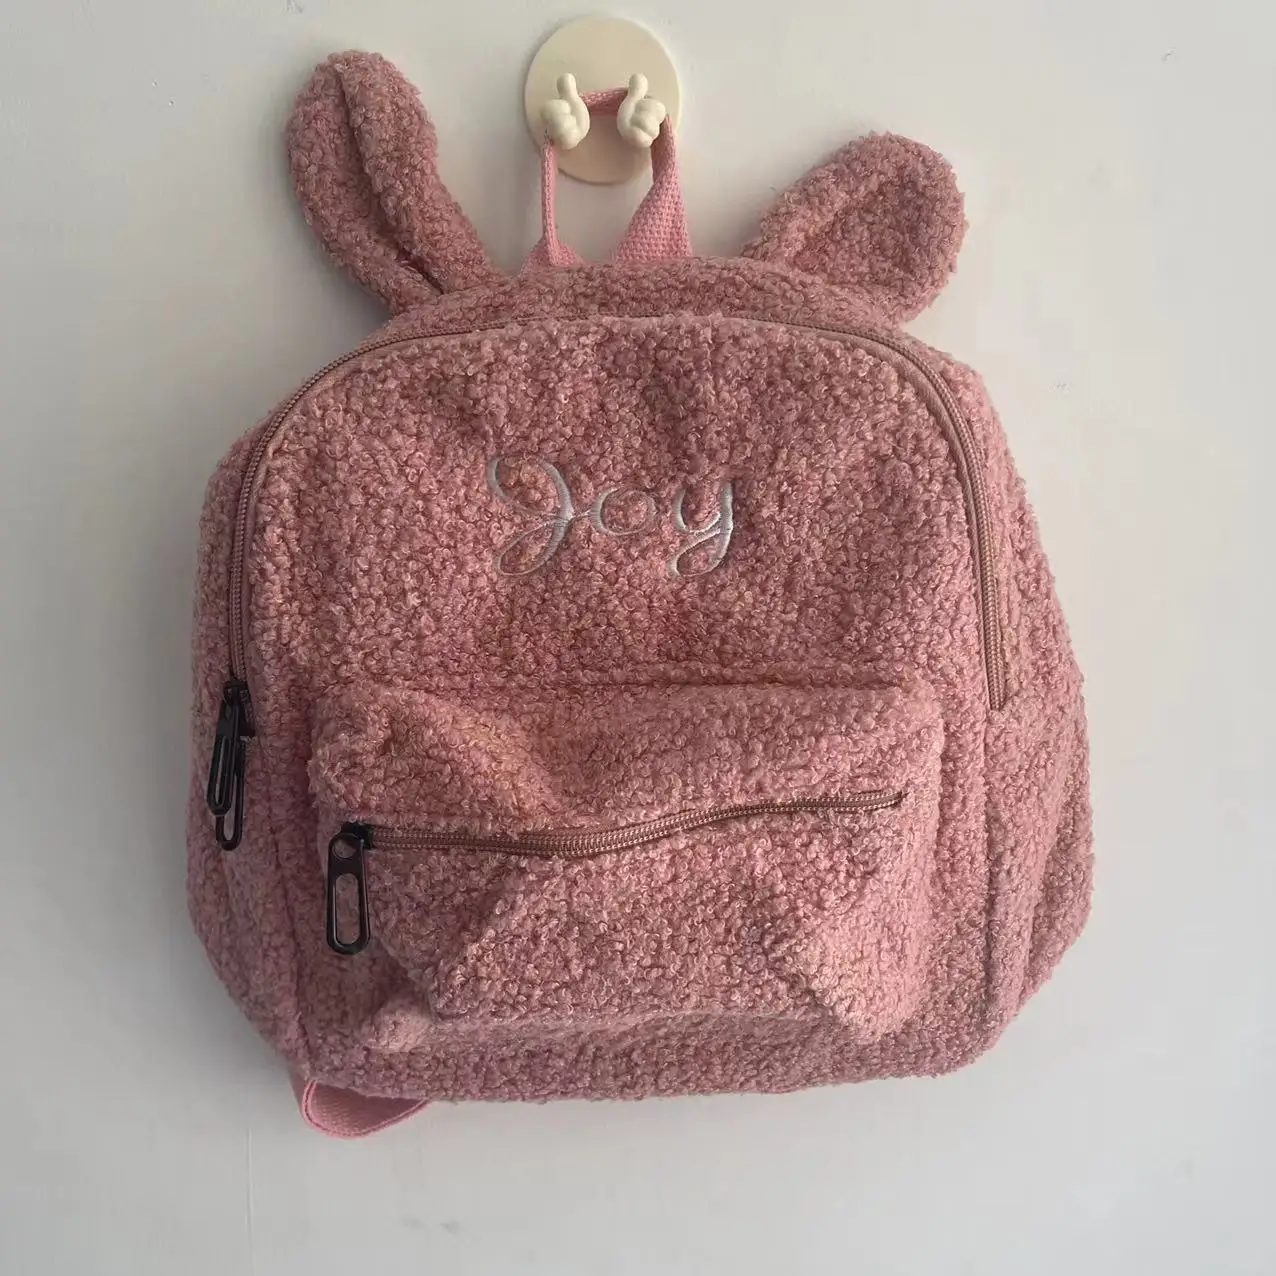 

Personalized embroidered plush cute backpack, custom with any name, portable children's travel bag, bear shaped shoulder bag